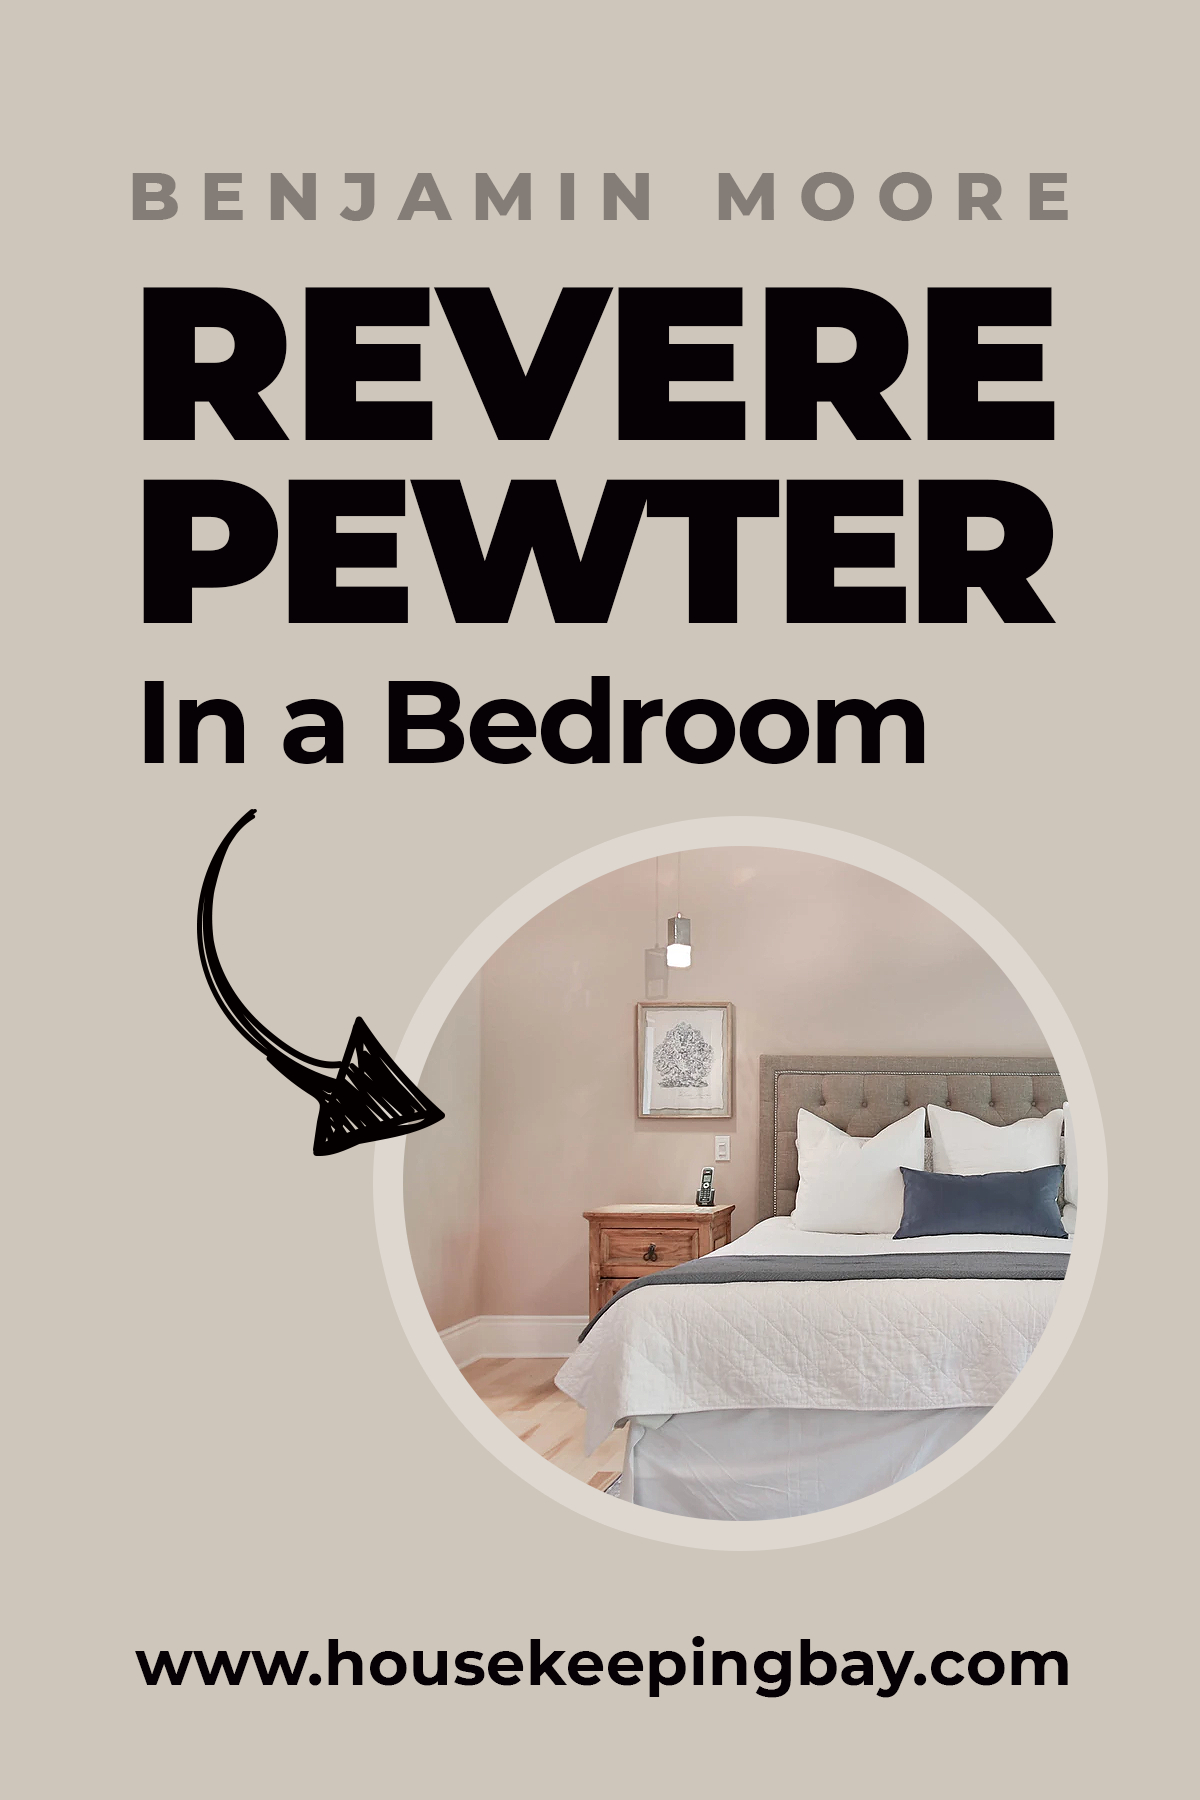 Revere Pewter In a Bedroom